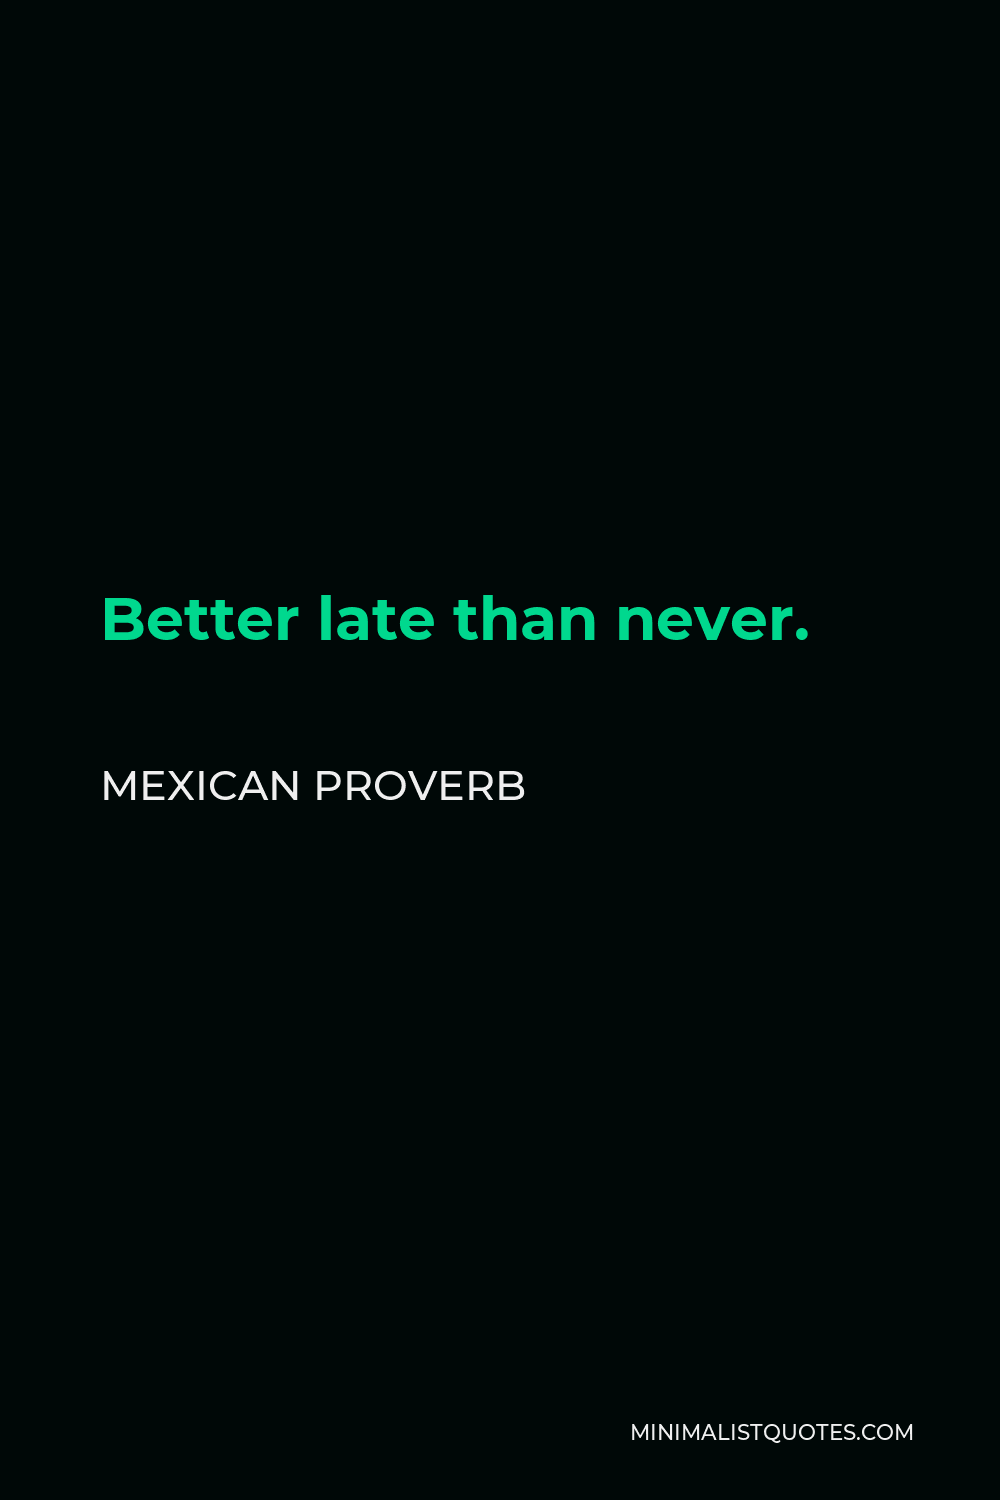 Mexican Proverb Quote - Better late than never.